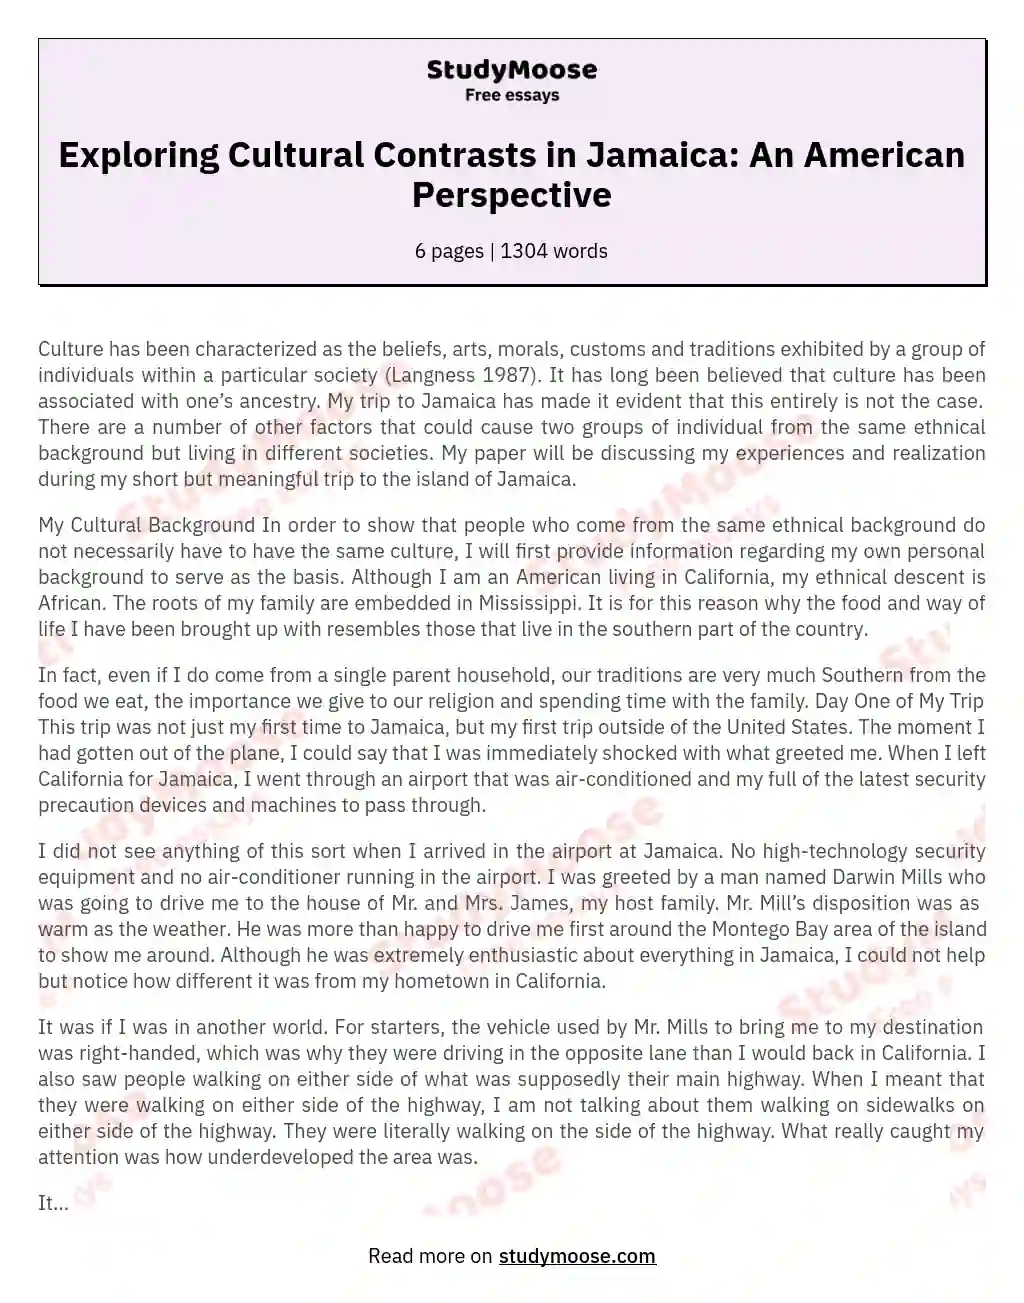 Exploring Cultural Contrasts in Jamaica: An American Perspective essay